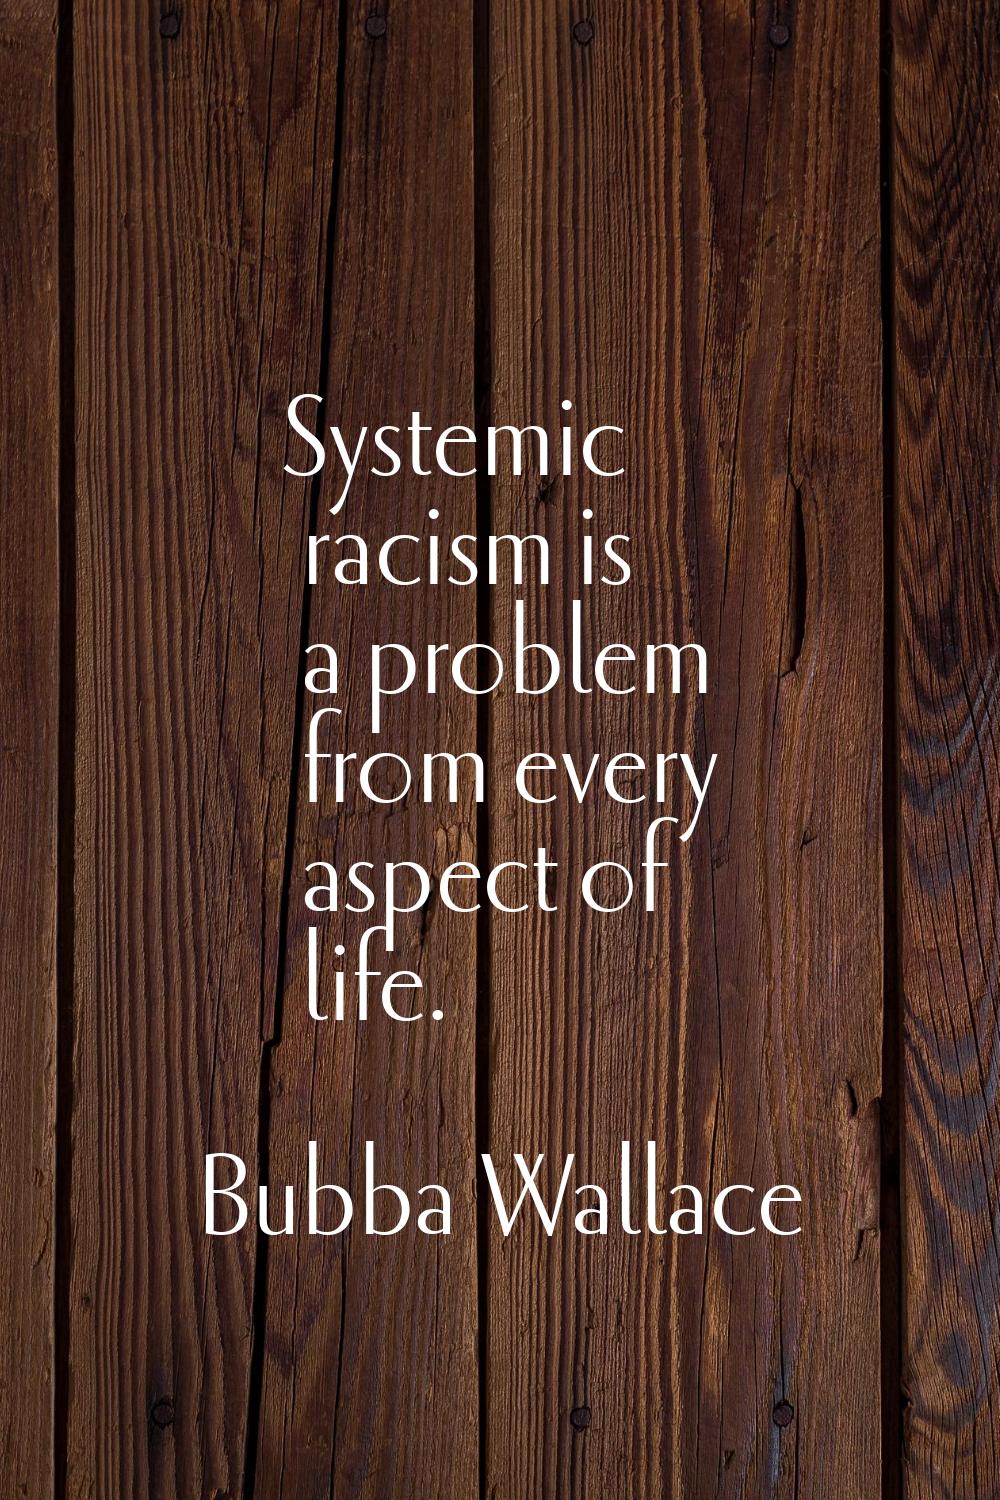 Systemic racism is a problem from every aspect of life.